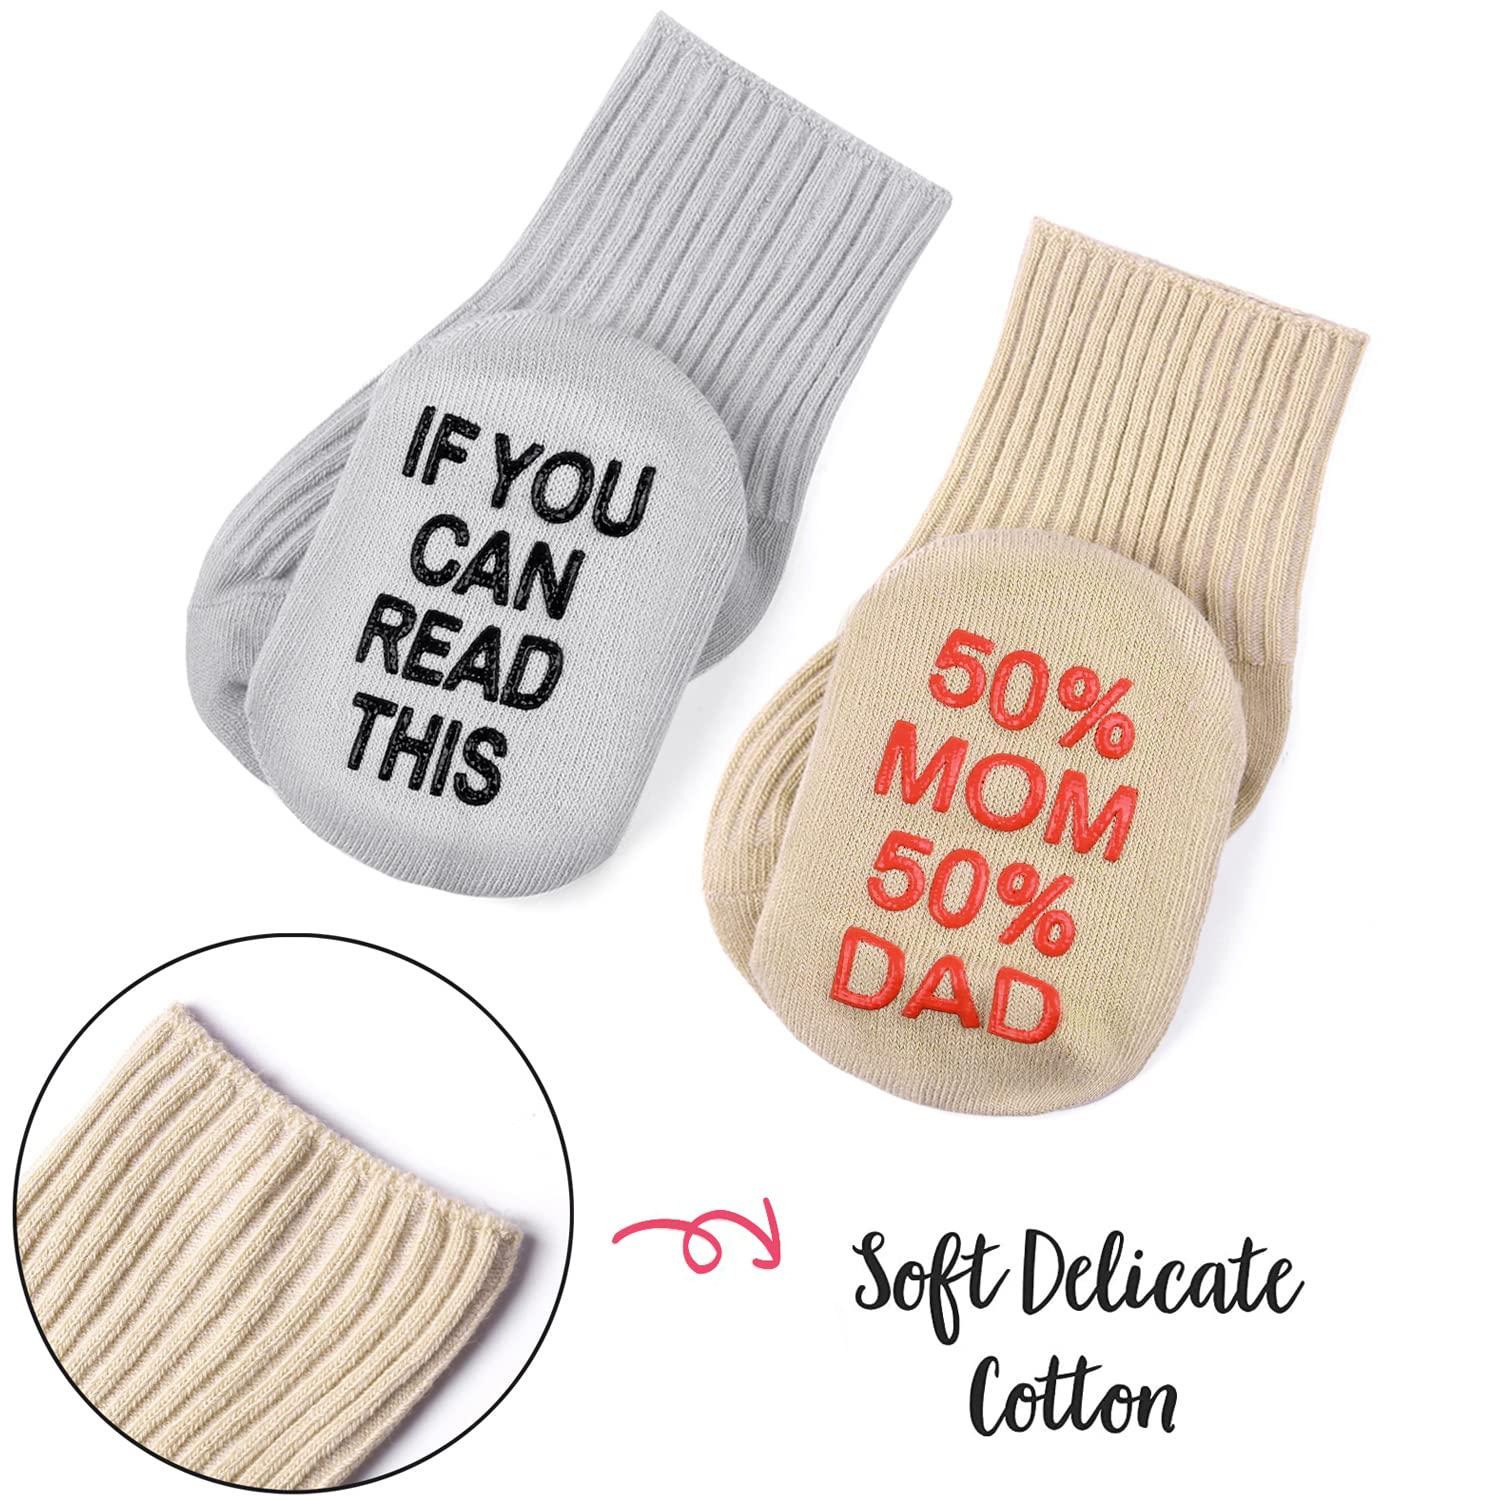 New Parents Gift, Gift for New Parents, New Parents, New Mom Gifts Funny,  Mom Socks, Funny Mom Gifts, First Time Dad Gifts, Gift for Newborn 